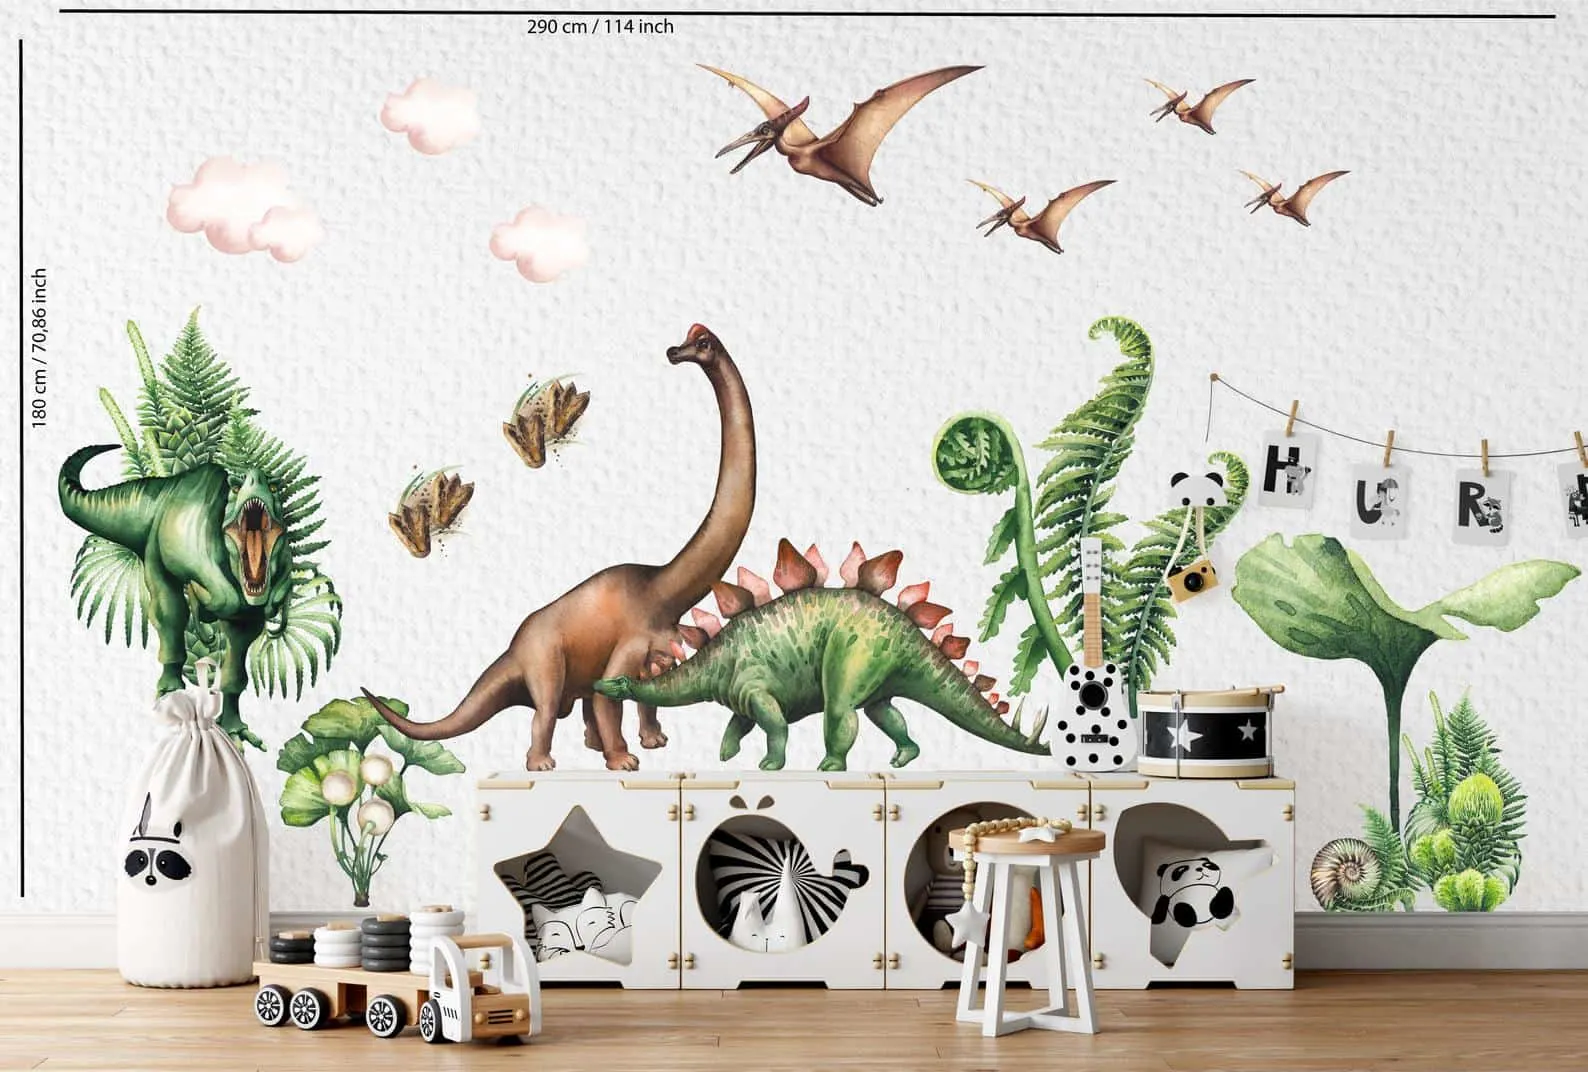 Details about   Dinosaurs Wall Stickers Luminous Decals Self-Adhesive Wallpaper Kids Room Decor